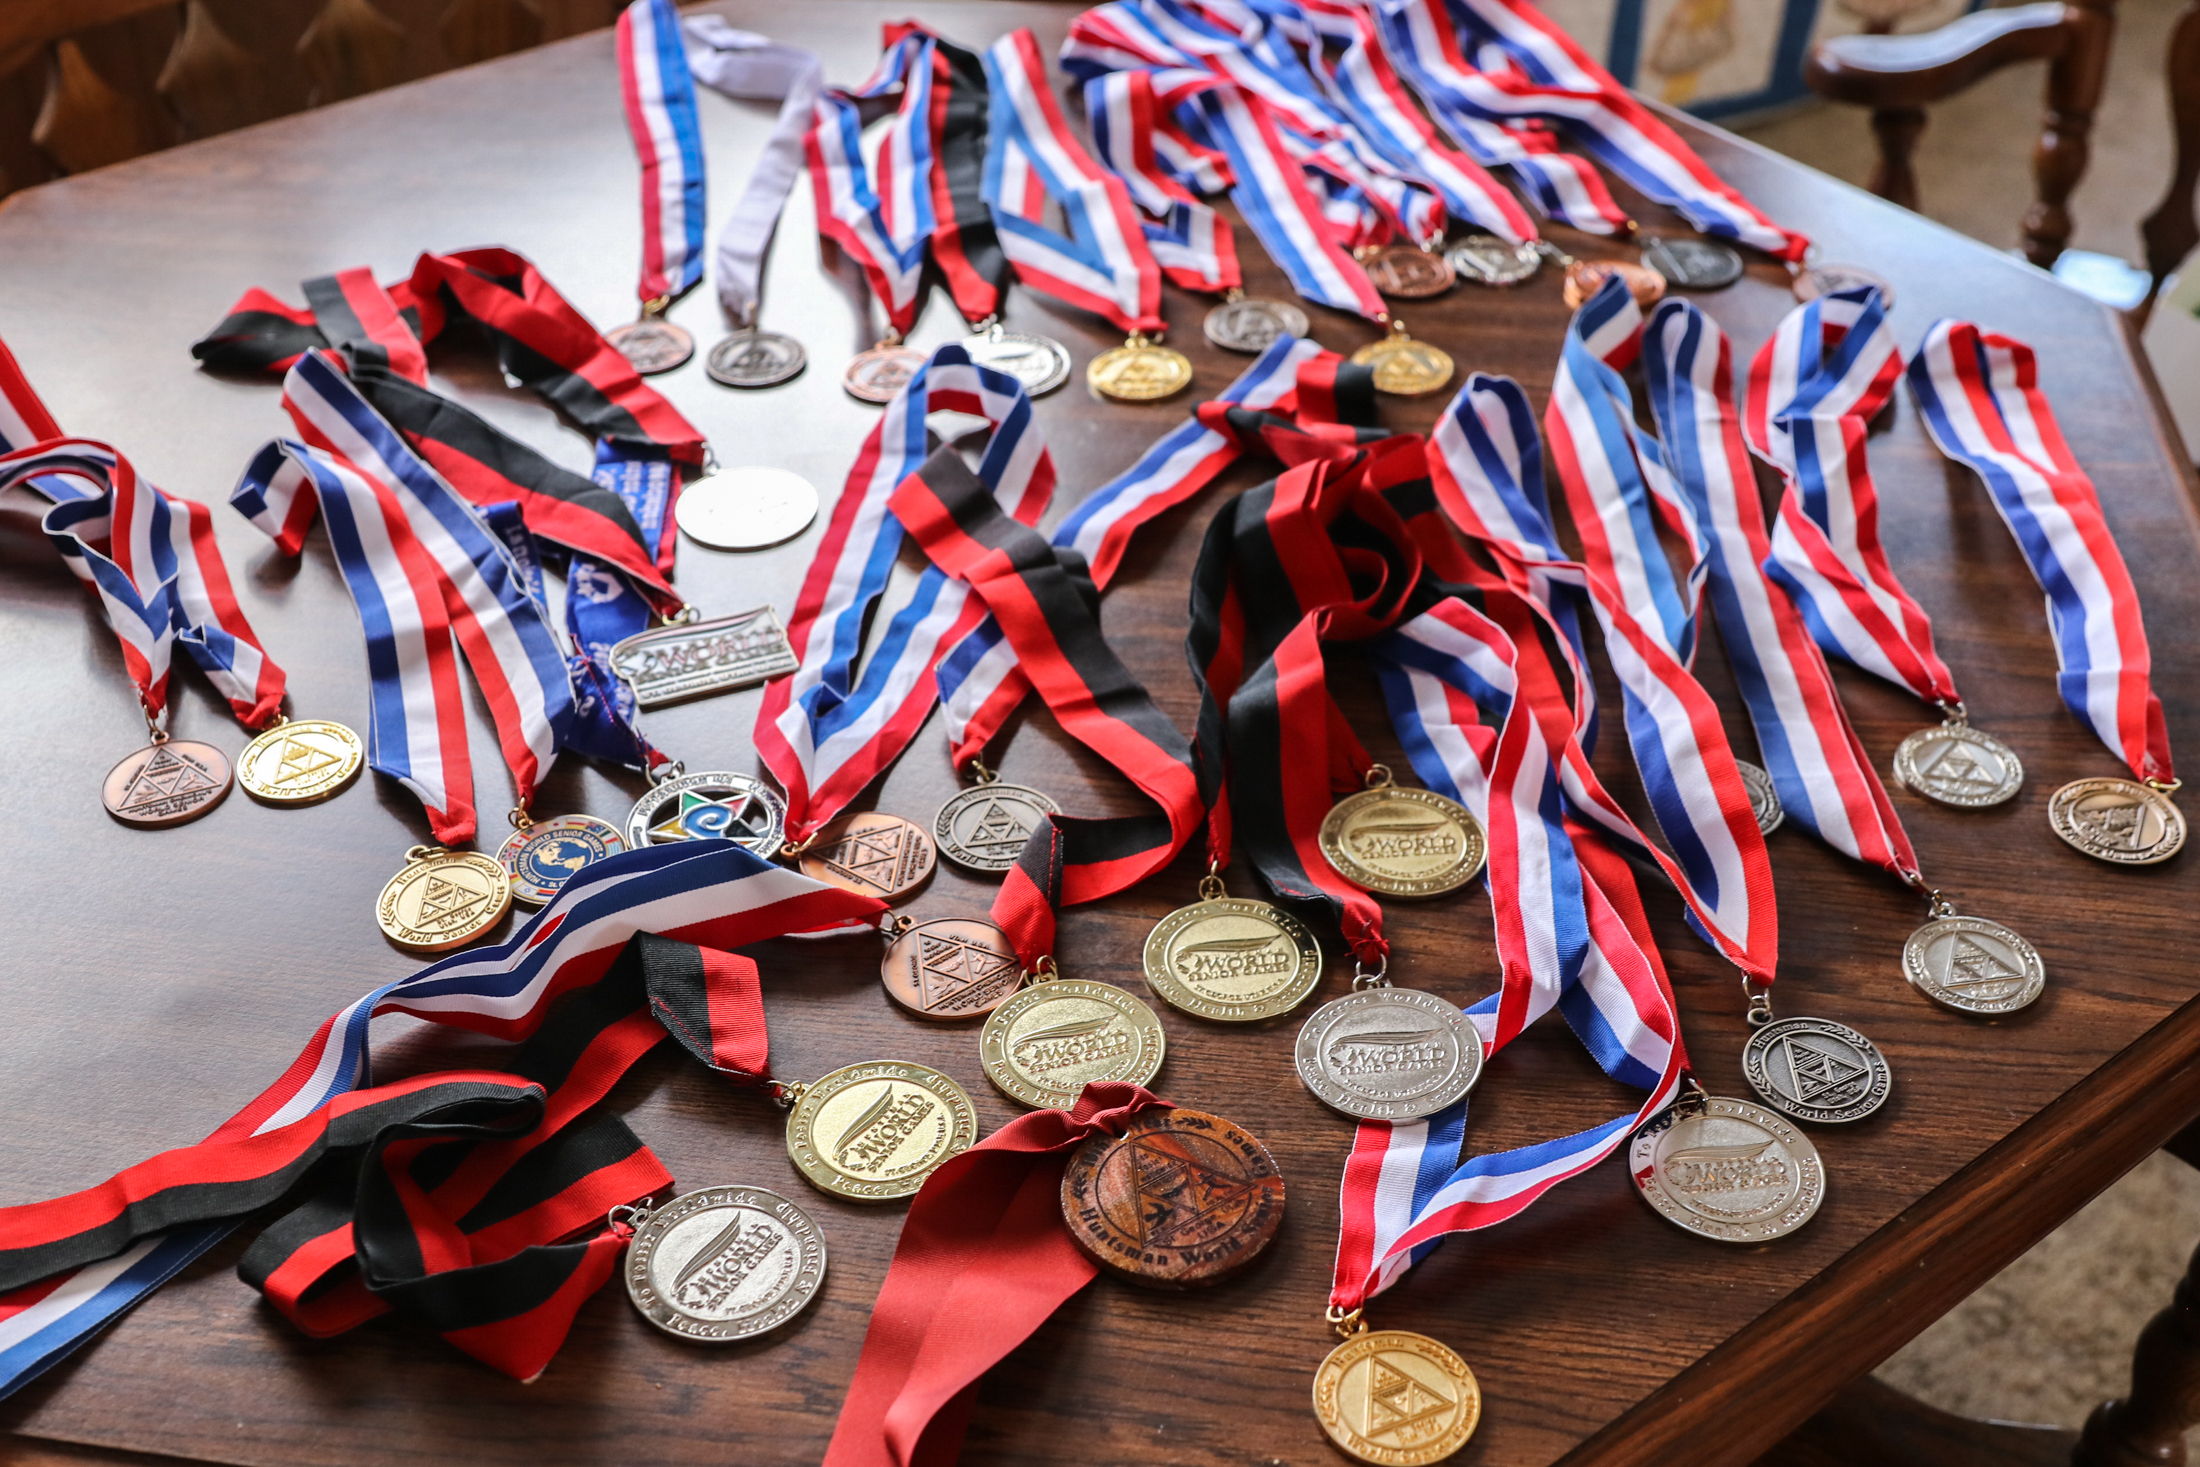 Medals from the Senior Olympics